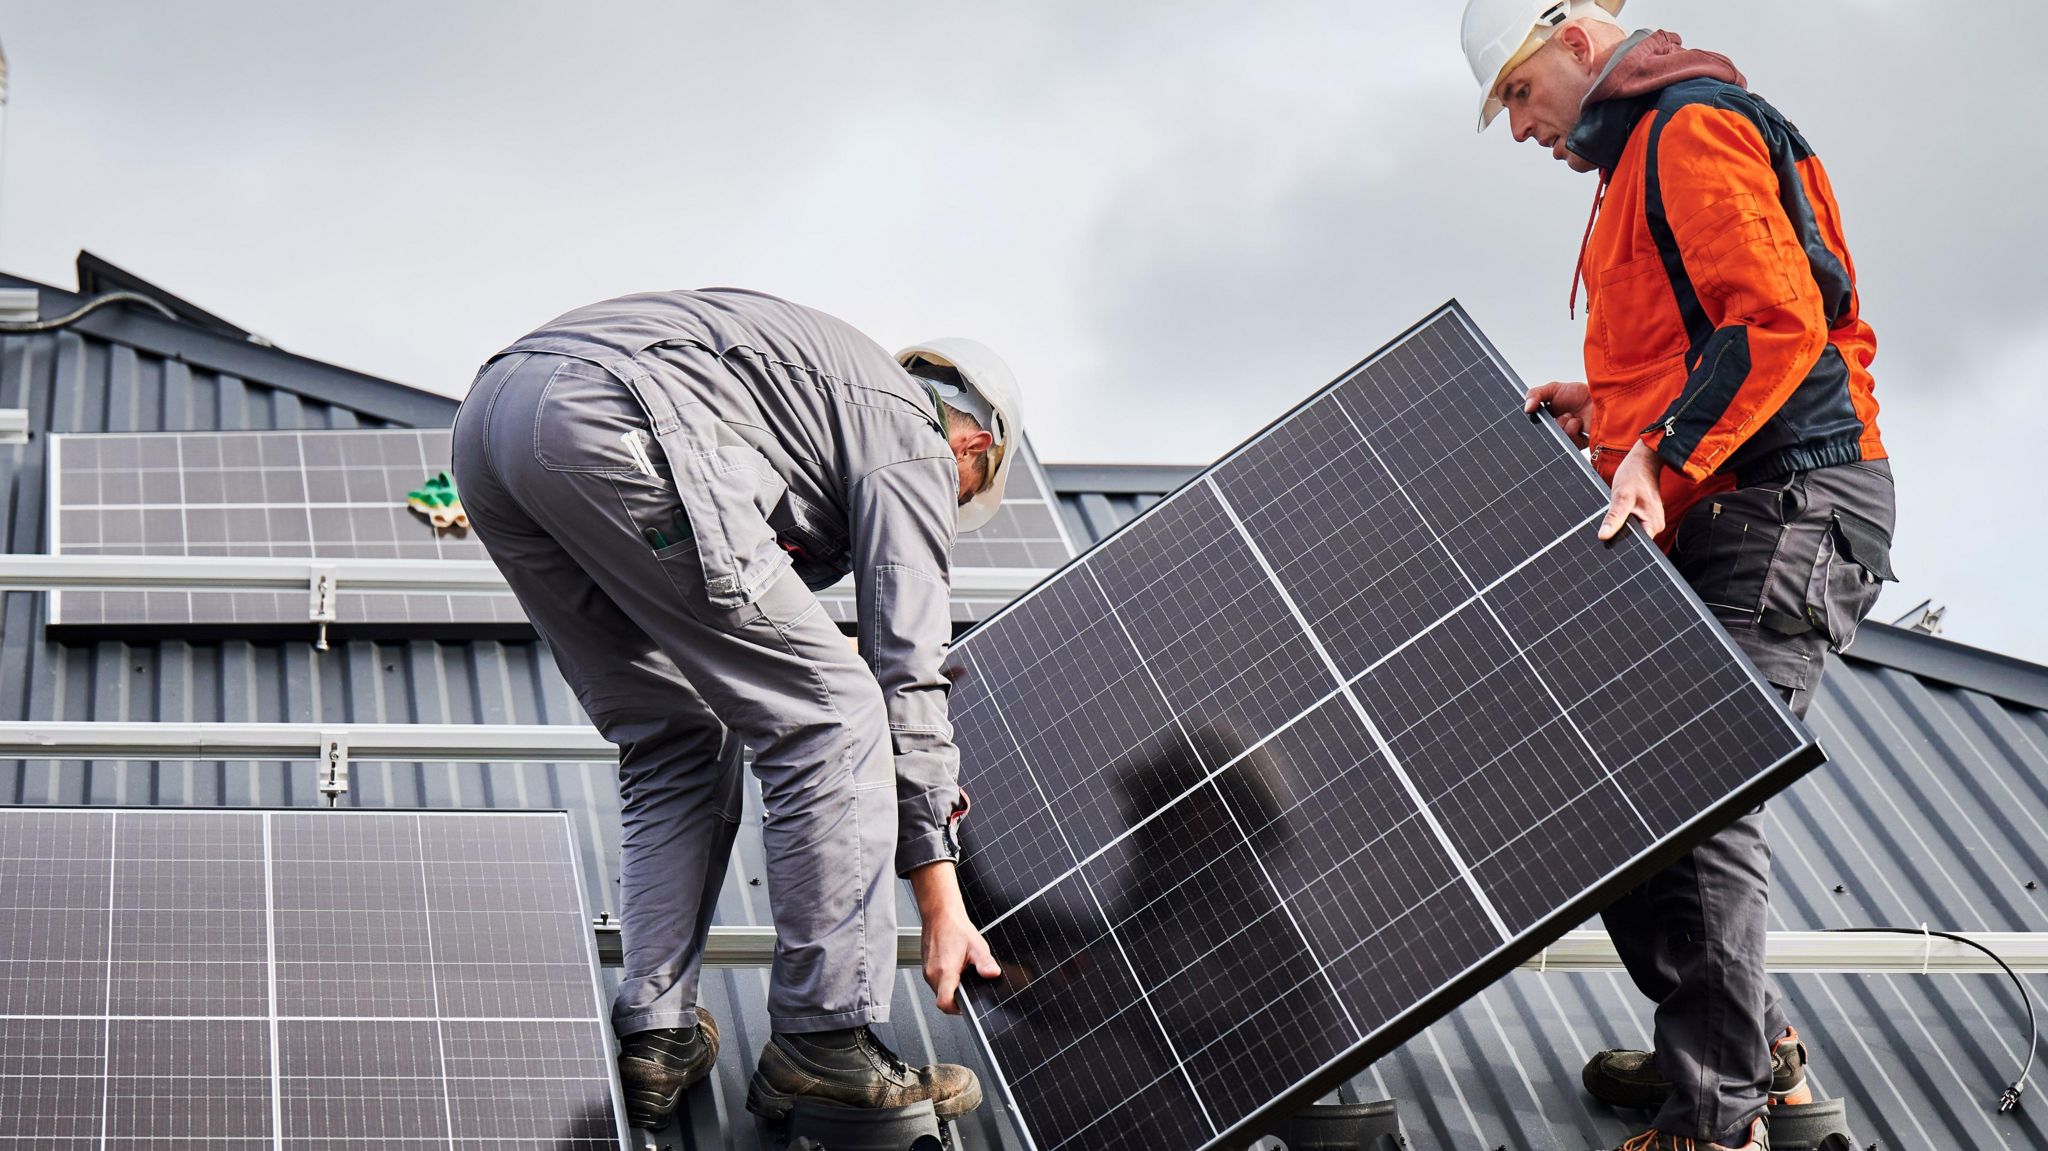 Two workmen installing solar panels on a roof